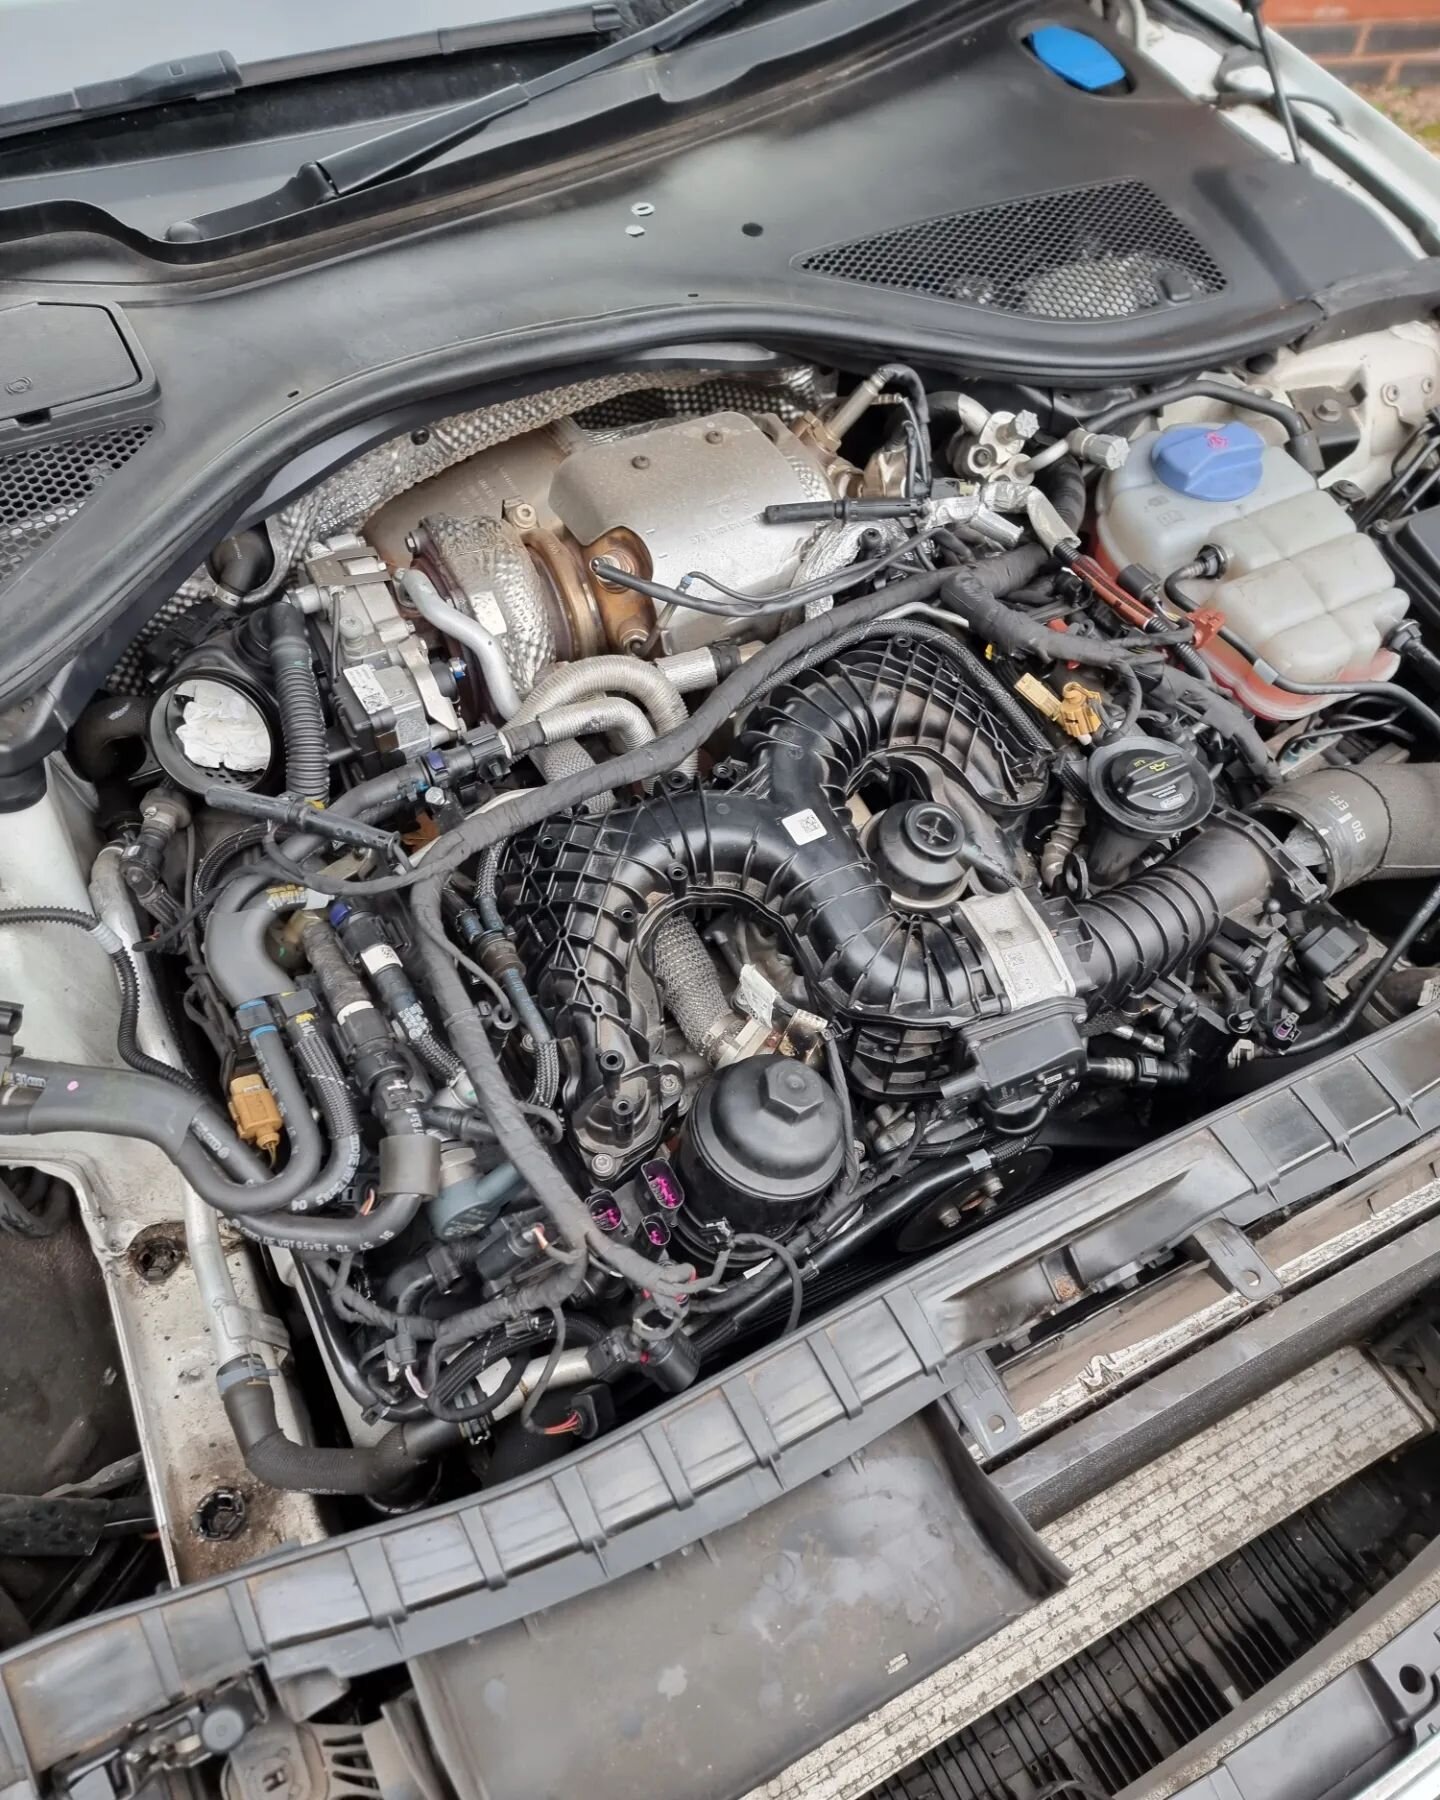 Having an amazing time working on this A7 3.0tdi with an oil cooler gasket failure 🙃🤡 

OEM replacement parts enroute along with a few others ready to build back up over the next few days. Seeing this run again will be really satisfying.

#audi #a7